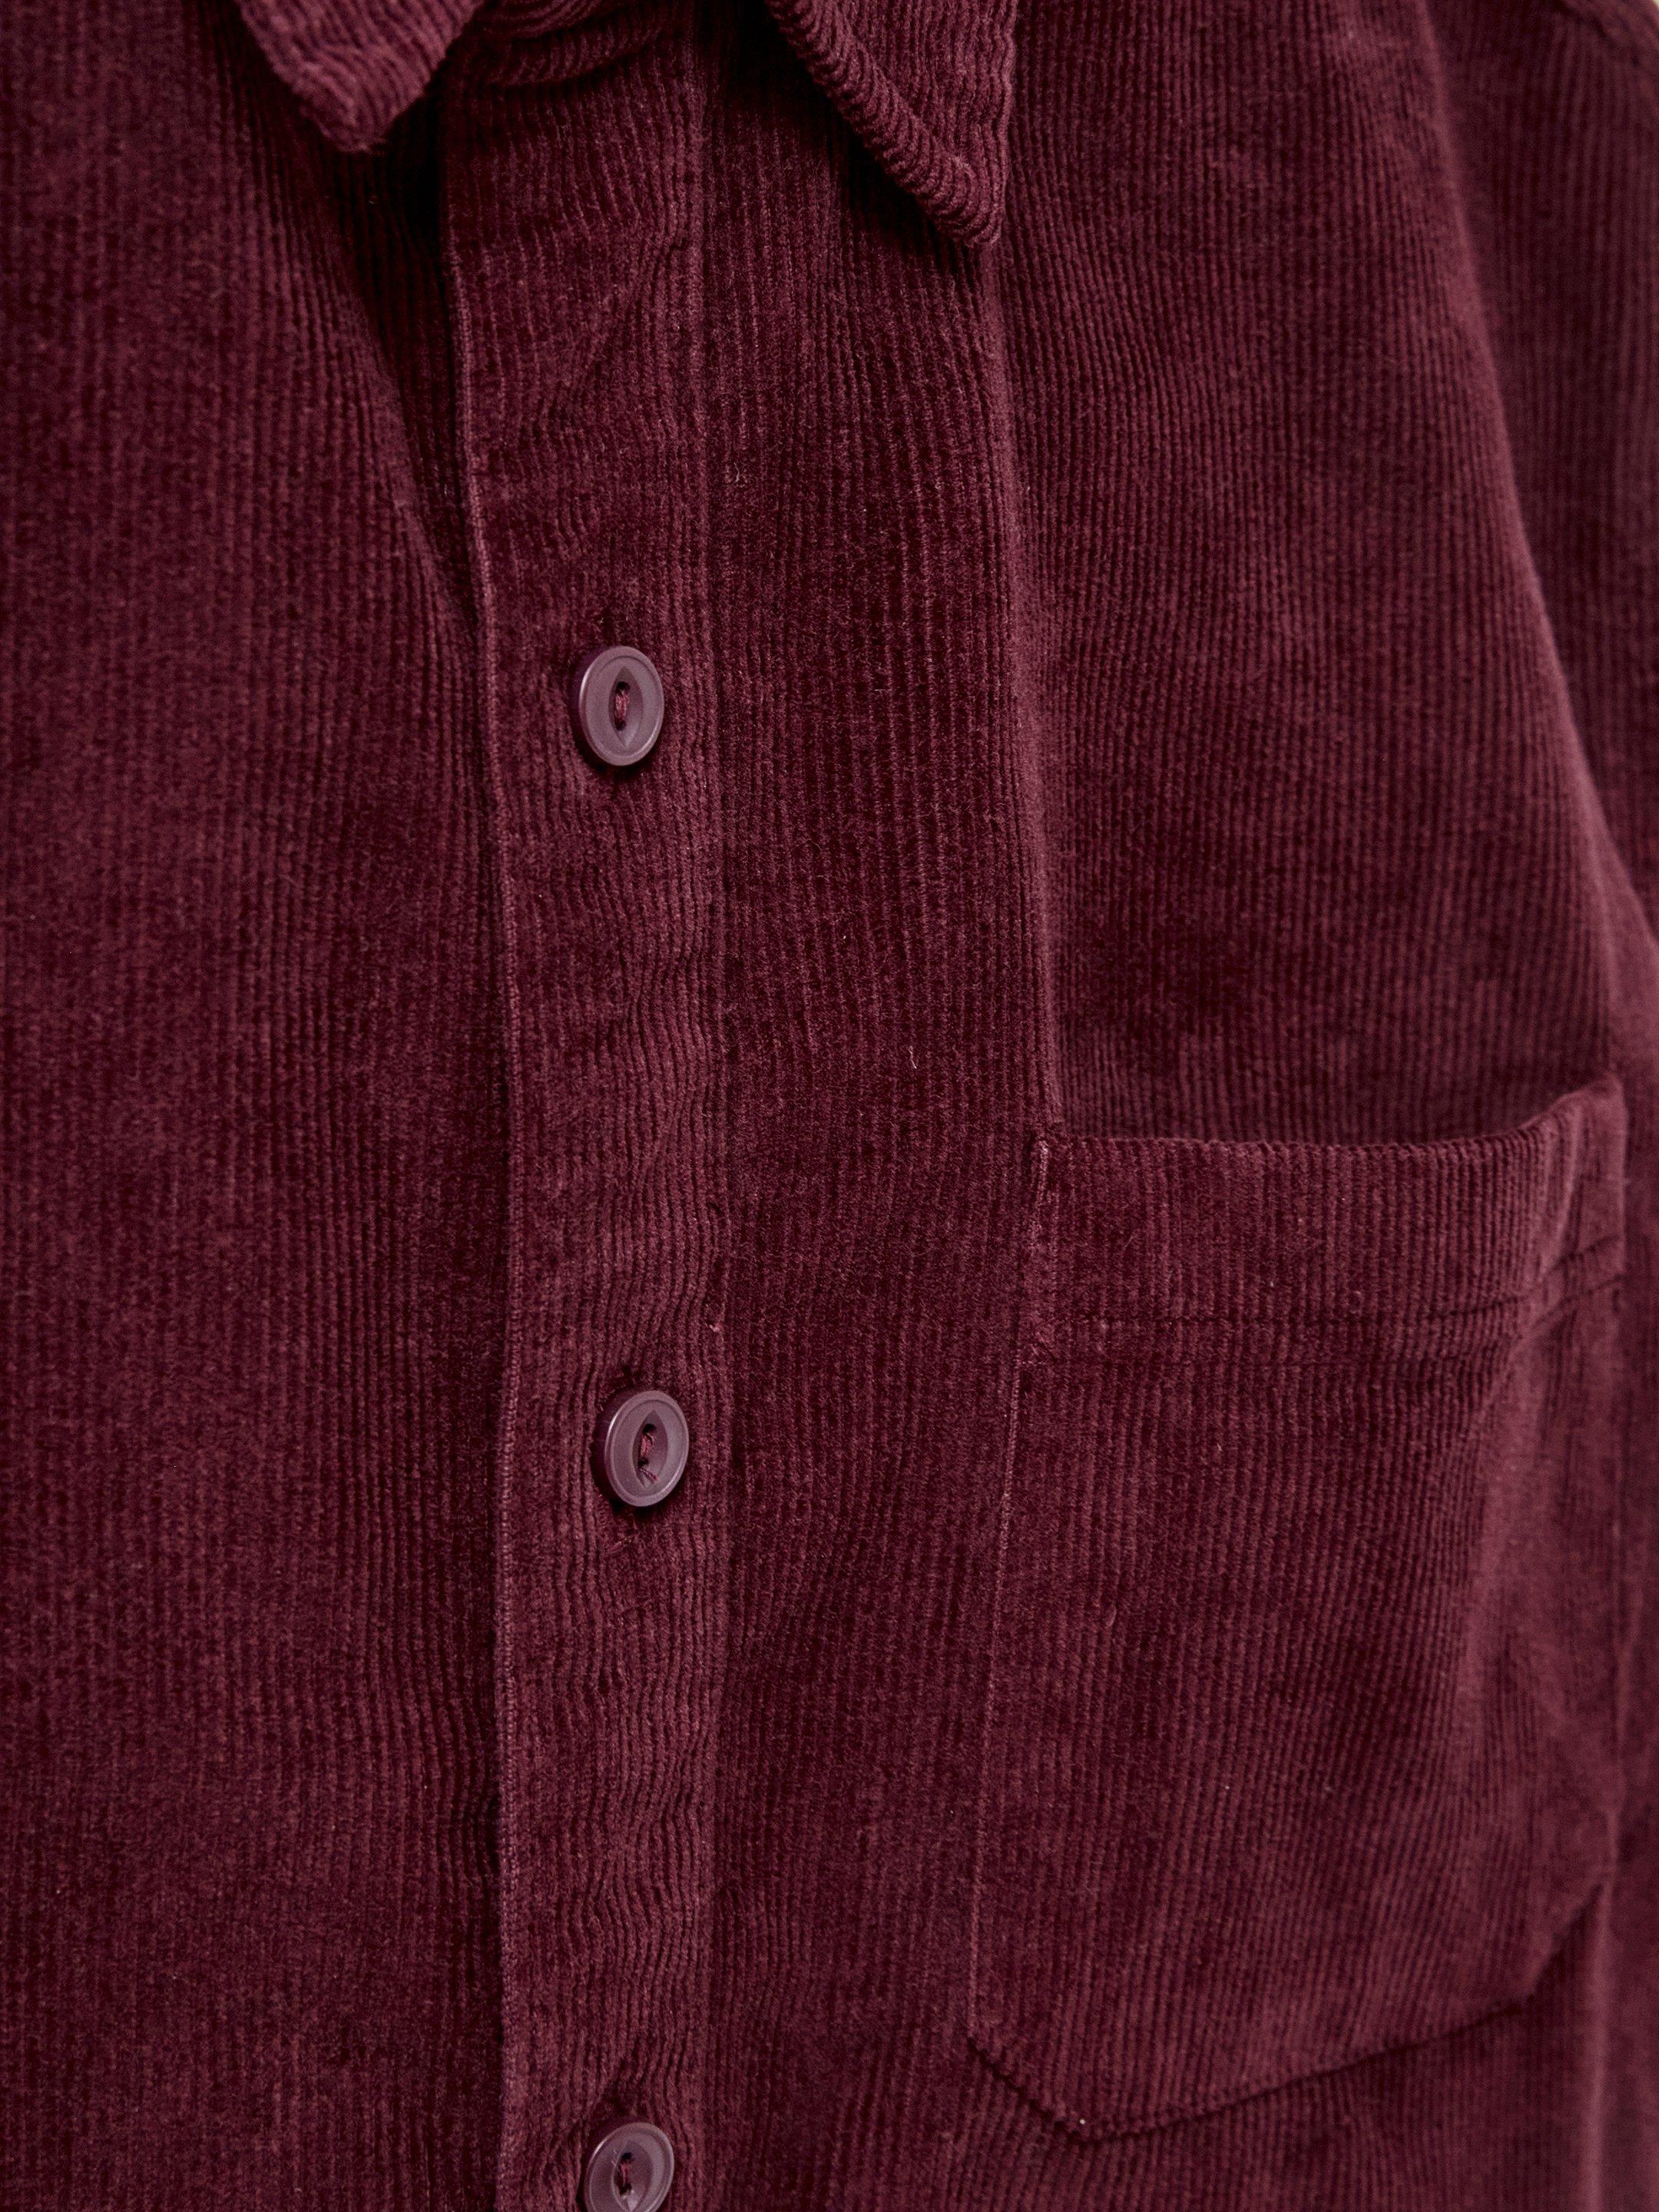 Whitwick Cord Shirt in DK RED - FLAT DETAIL